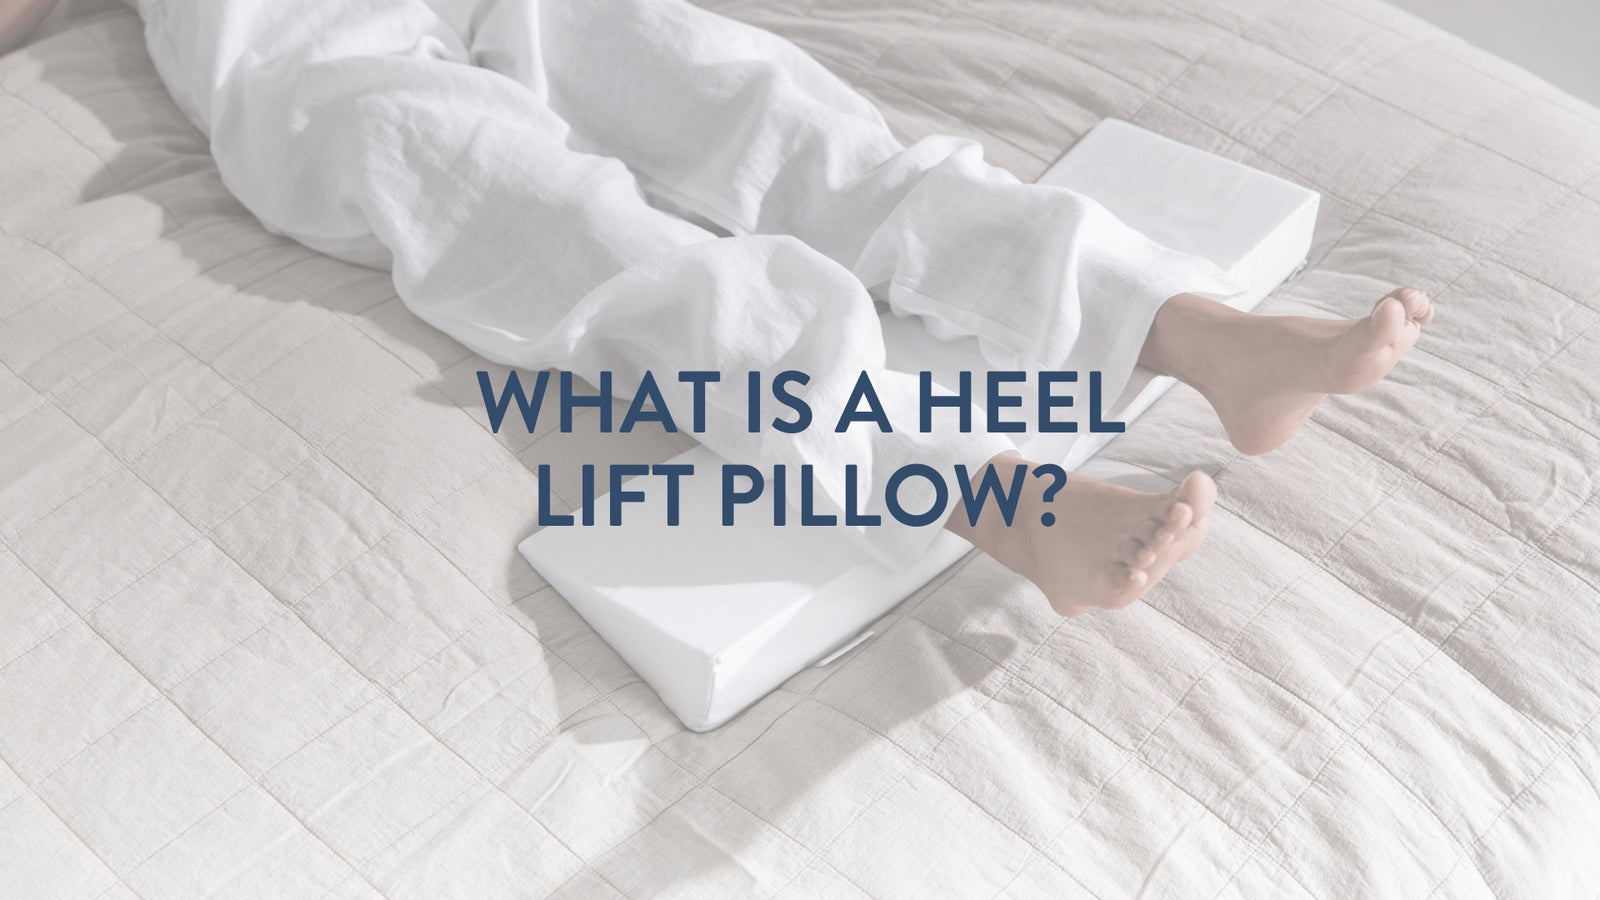 what is a heel lift pillow how does it help with bed sores Putnams UK